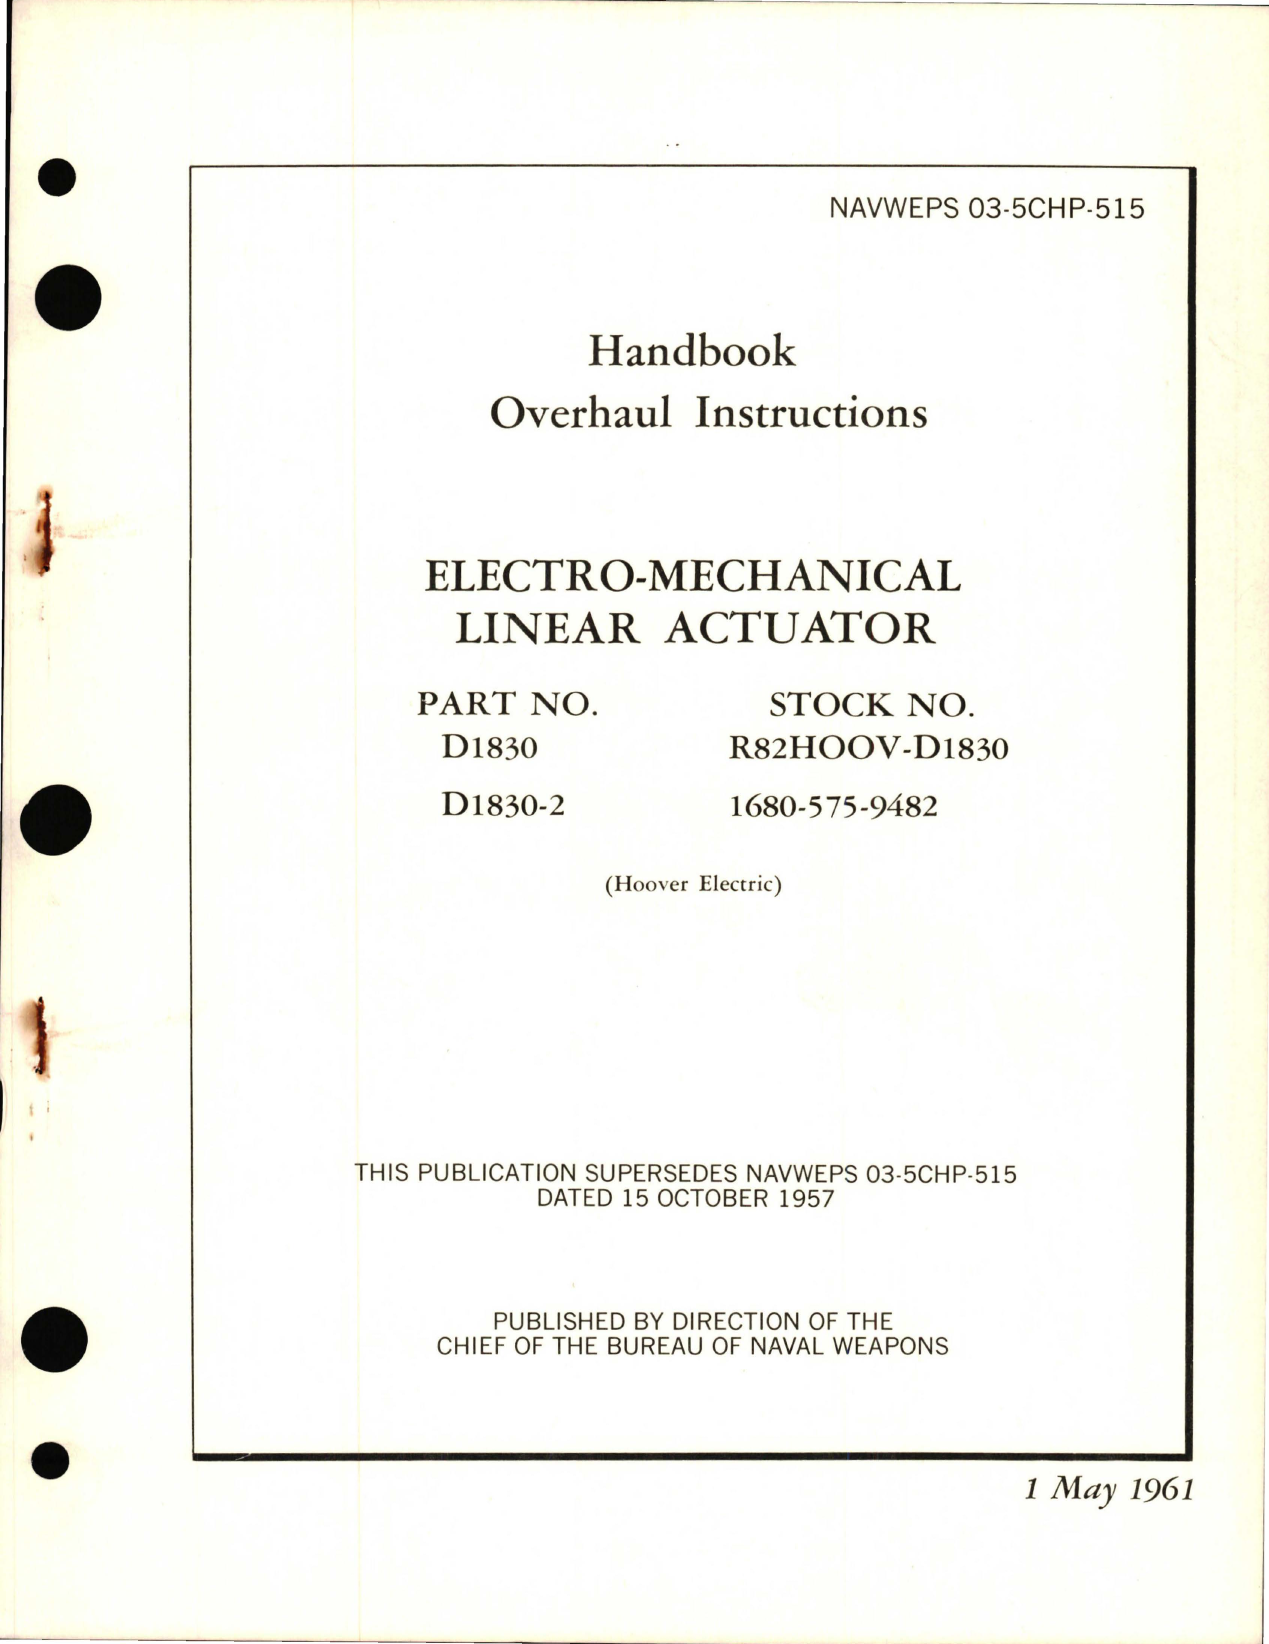 Sample page 1 from AirCorps Library document: Overhaul Instructions for Electro-Mechanical Linear Actuator Parts D1830 and D1830-2